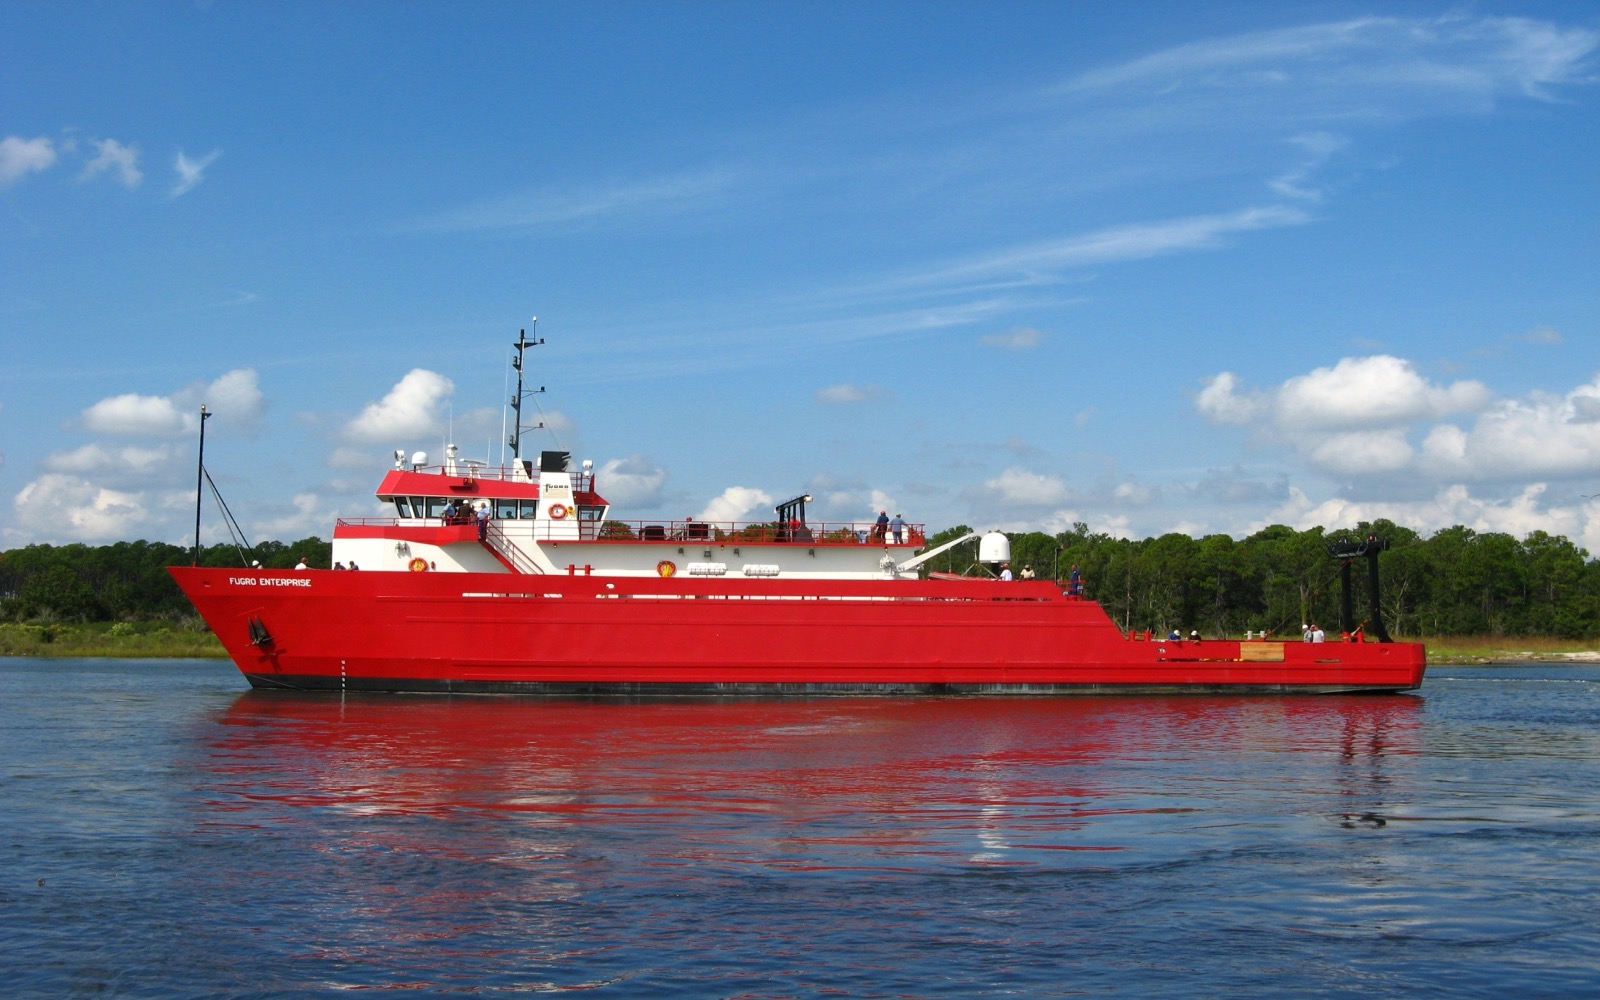 170 Foot Seismic Research Vessel